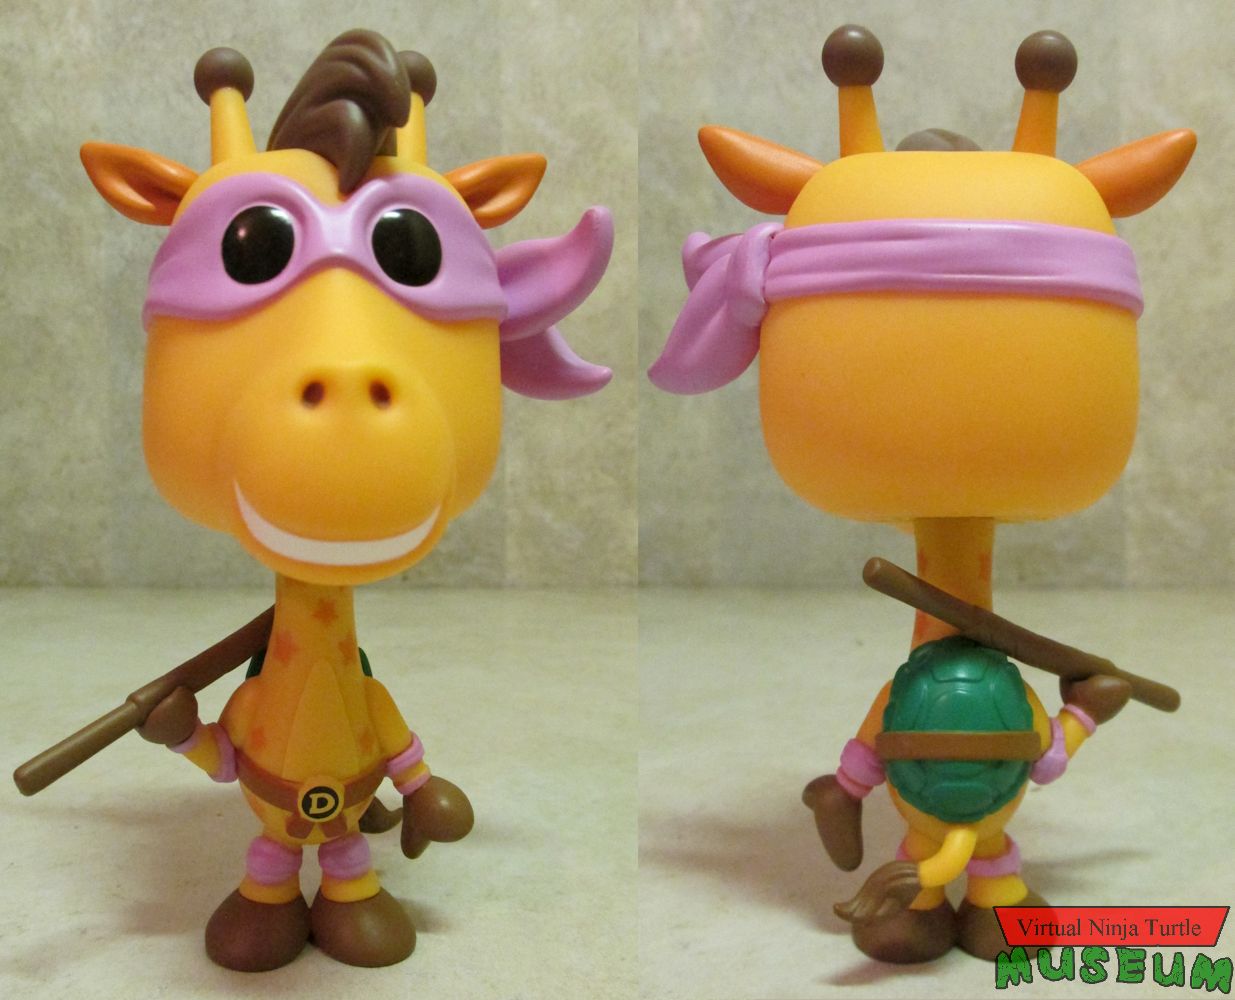 Geoffrey as Donatello front and back